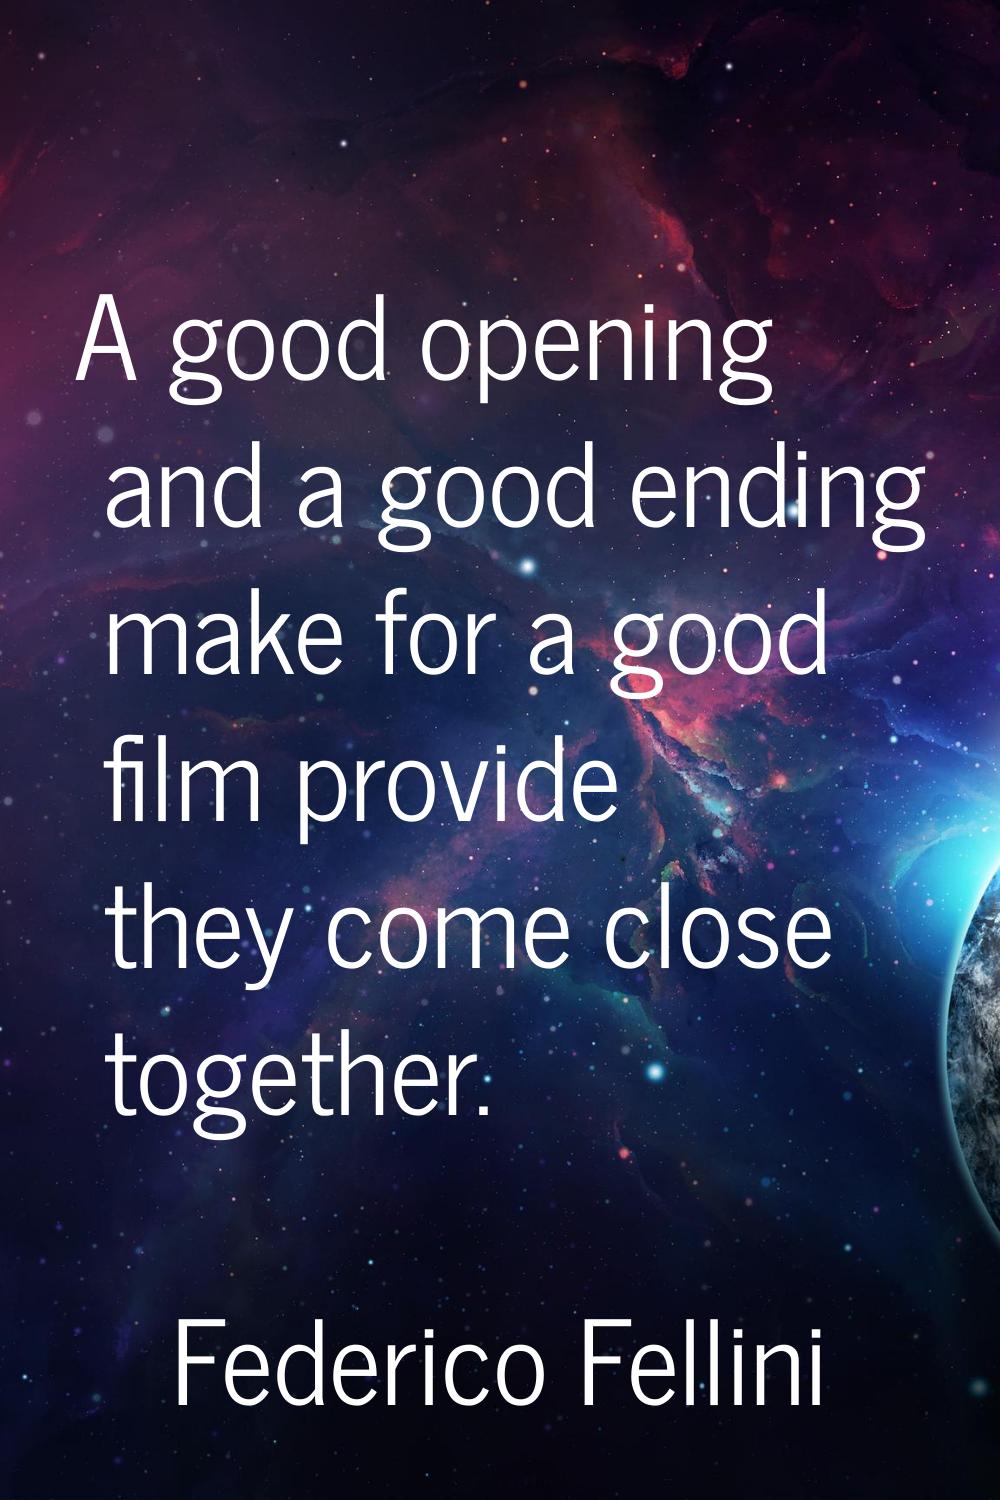 A good opening and a good ending make for a good film provide they come close together.